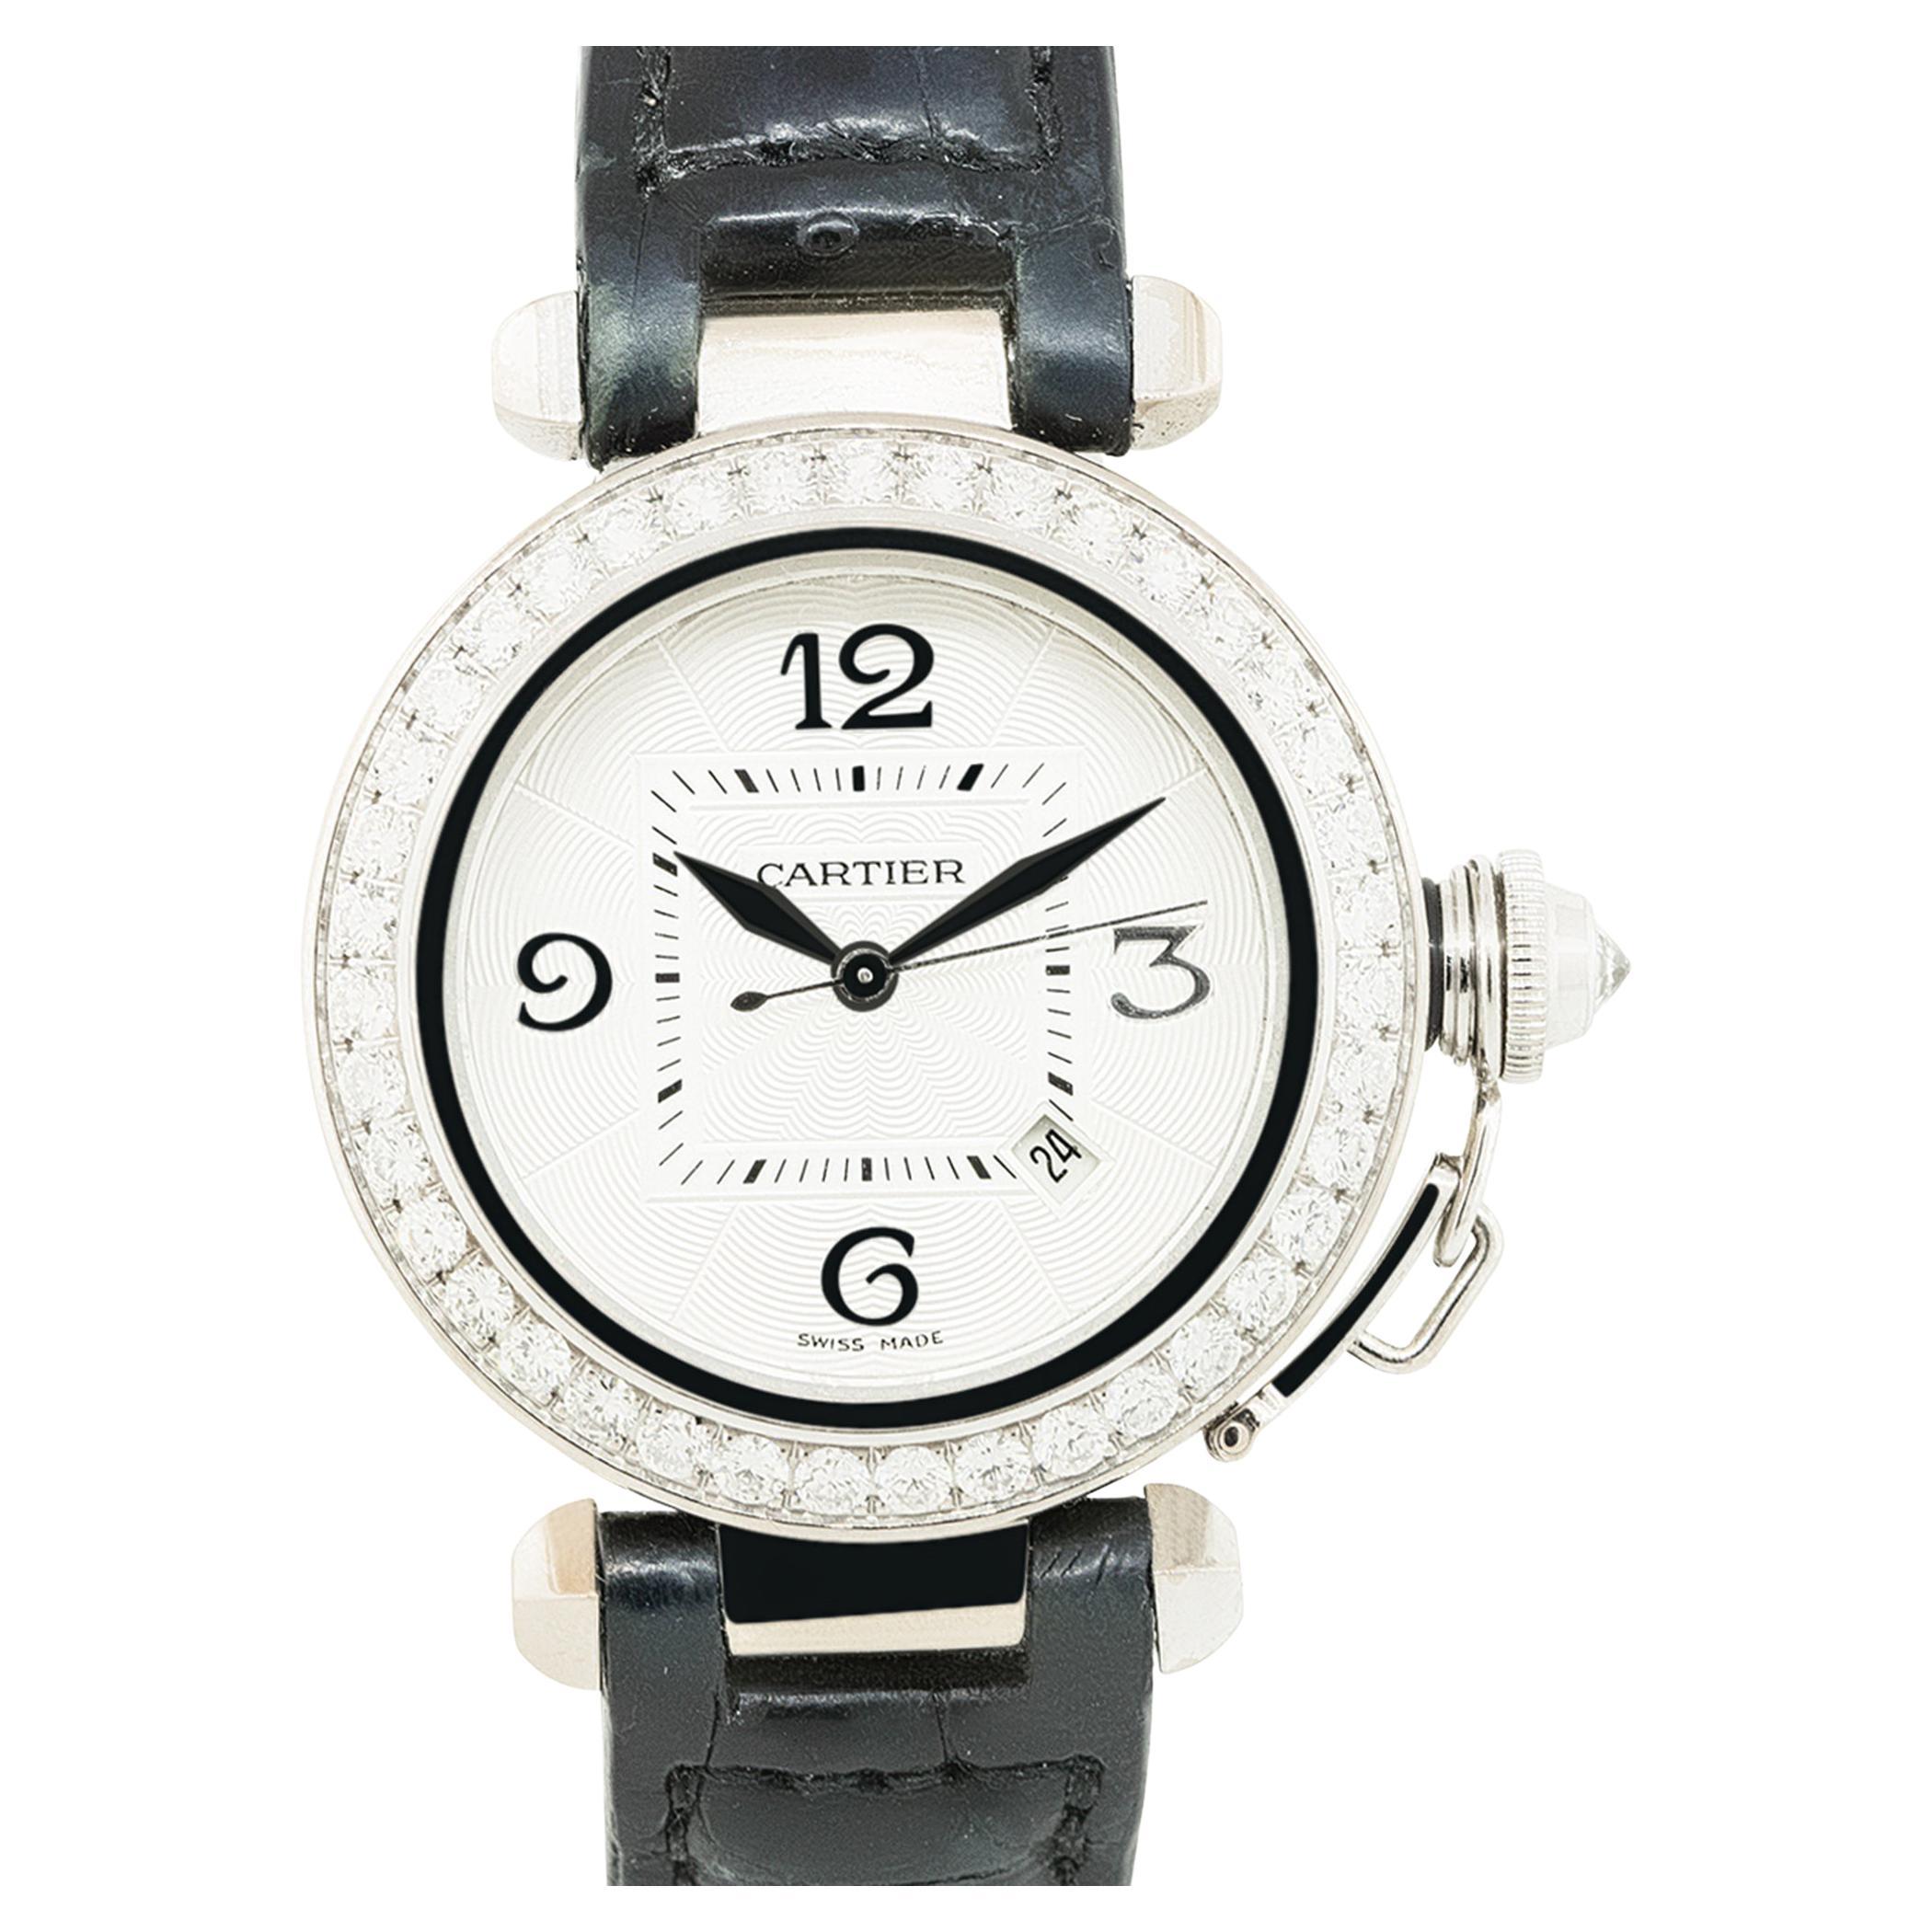 Cartier 2398 Pasha White Gold Watch 18 Karat on Black Leather in Stock